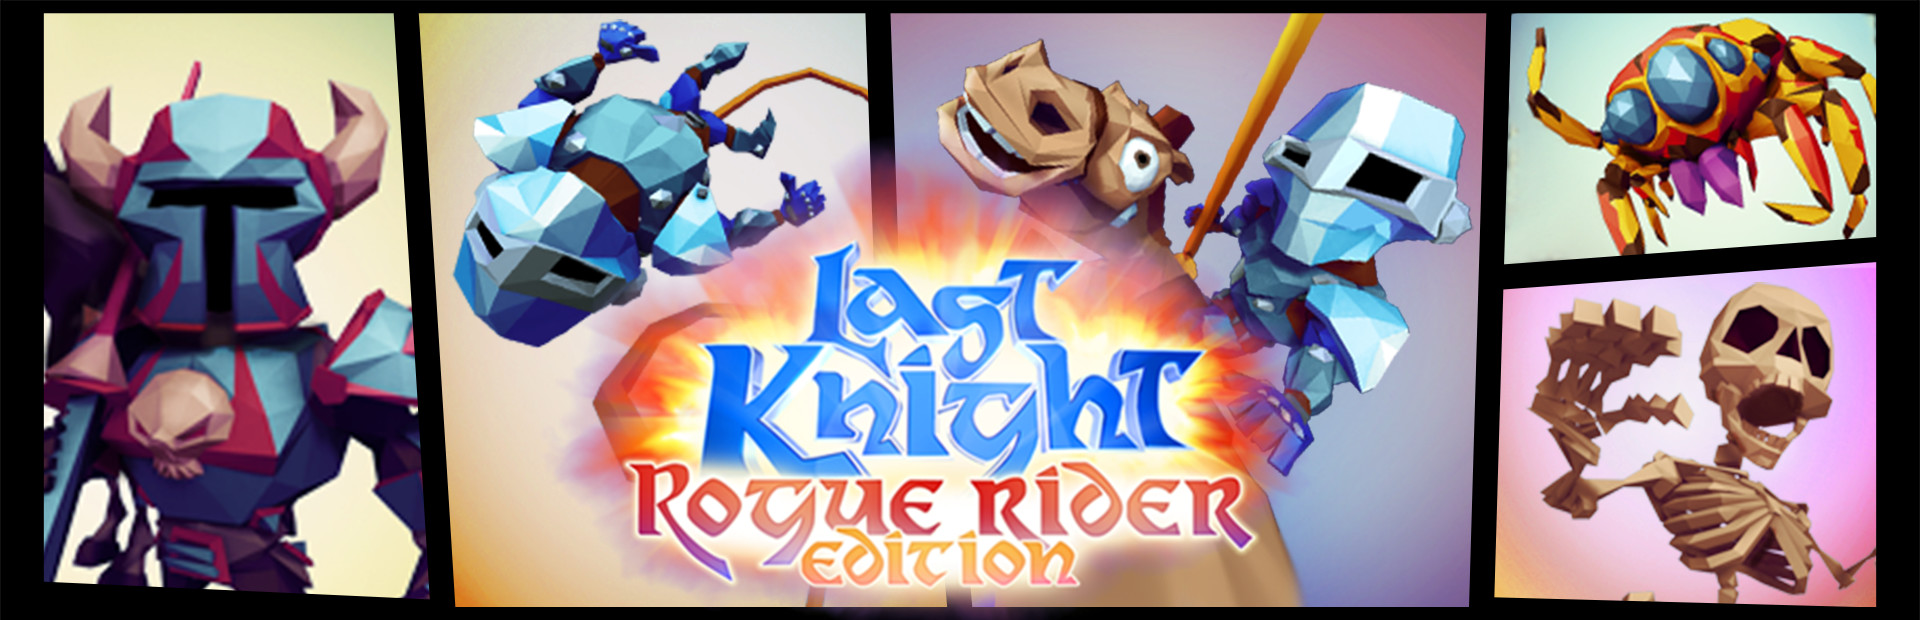 Last Knight: Rogue Rider Edition cover image